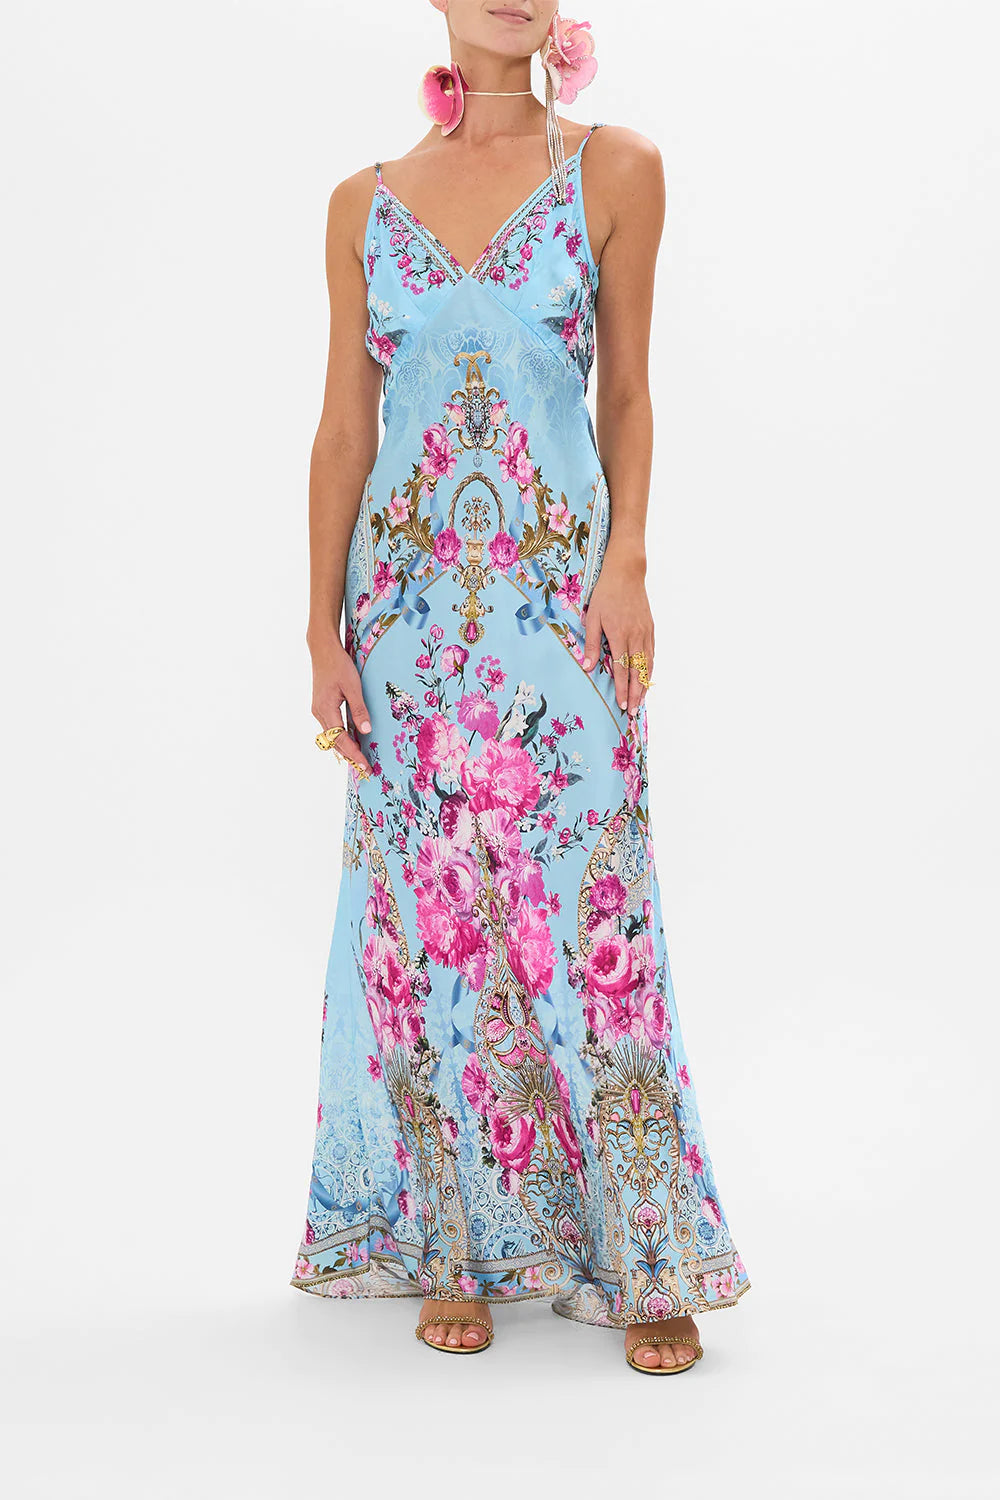 CAMILLA V NECK LONG BIAS SLIP DRESS WITH TRAIN IN DOWN THE GARDEN PATH